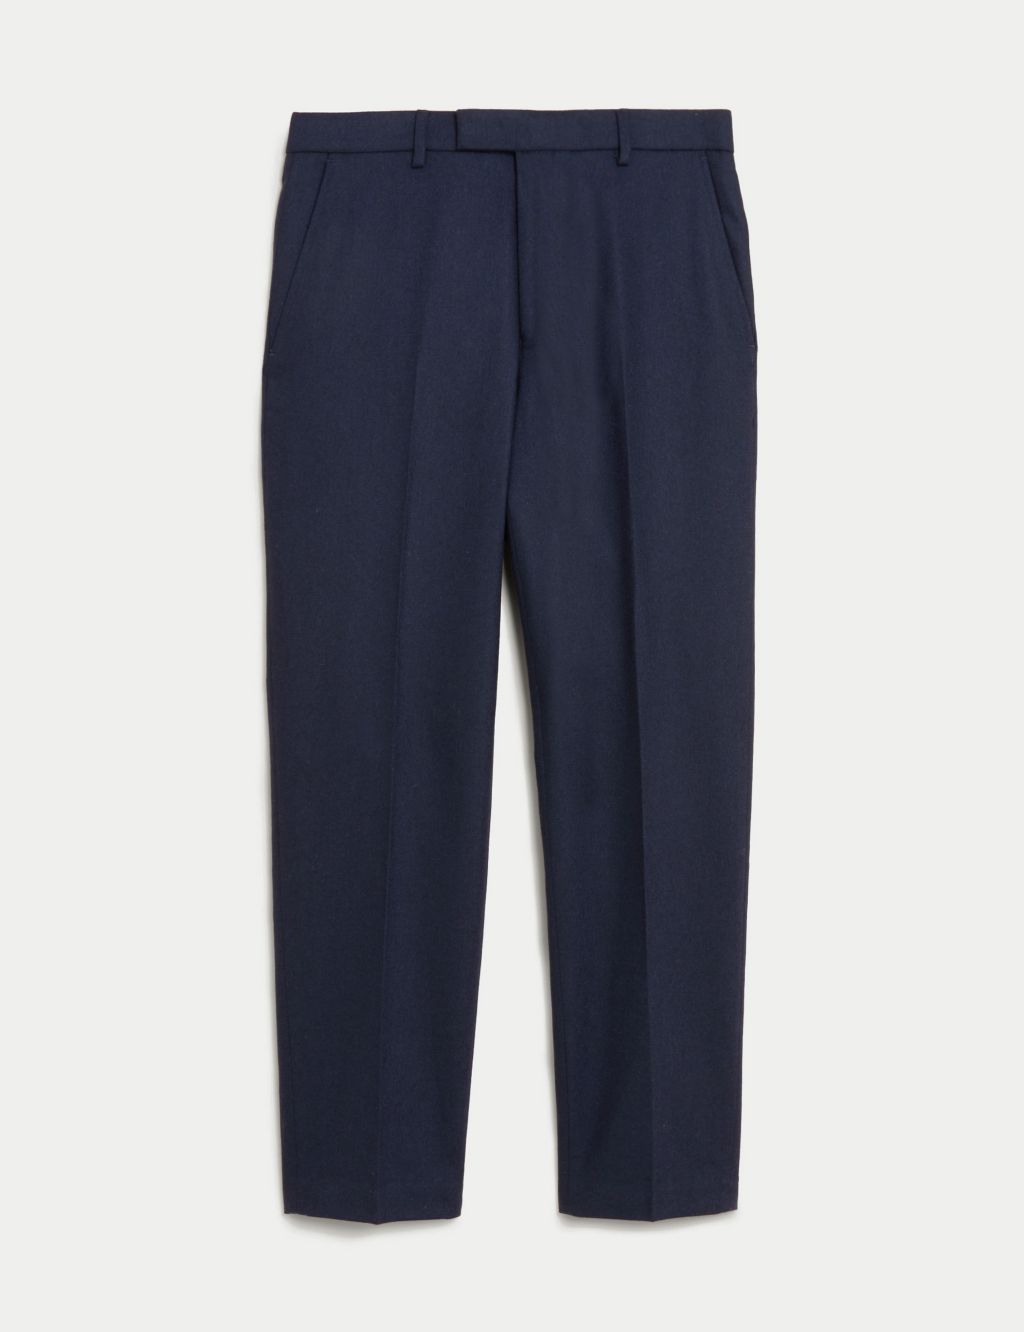 Tailored Fit Wool Rich Donegal Suit Trousers image 2